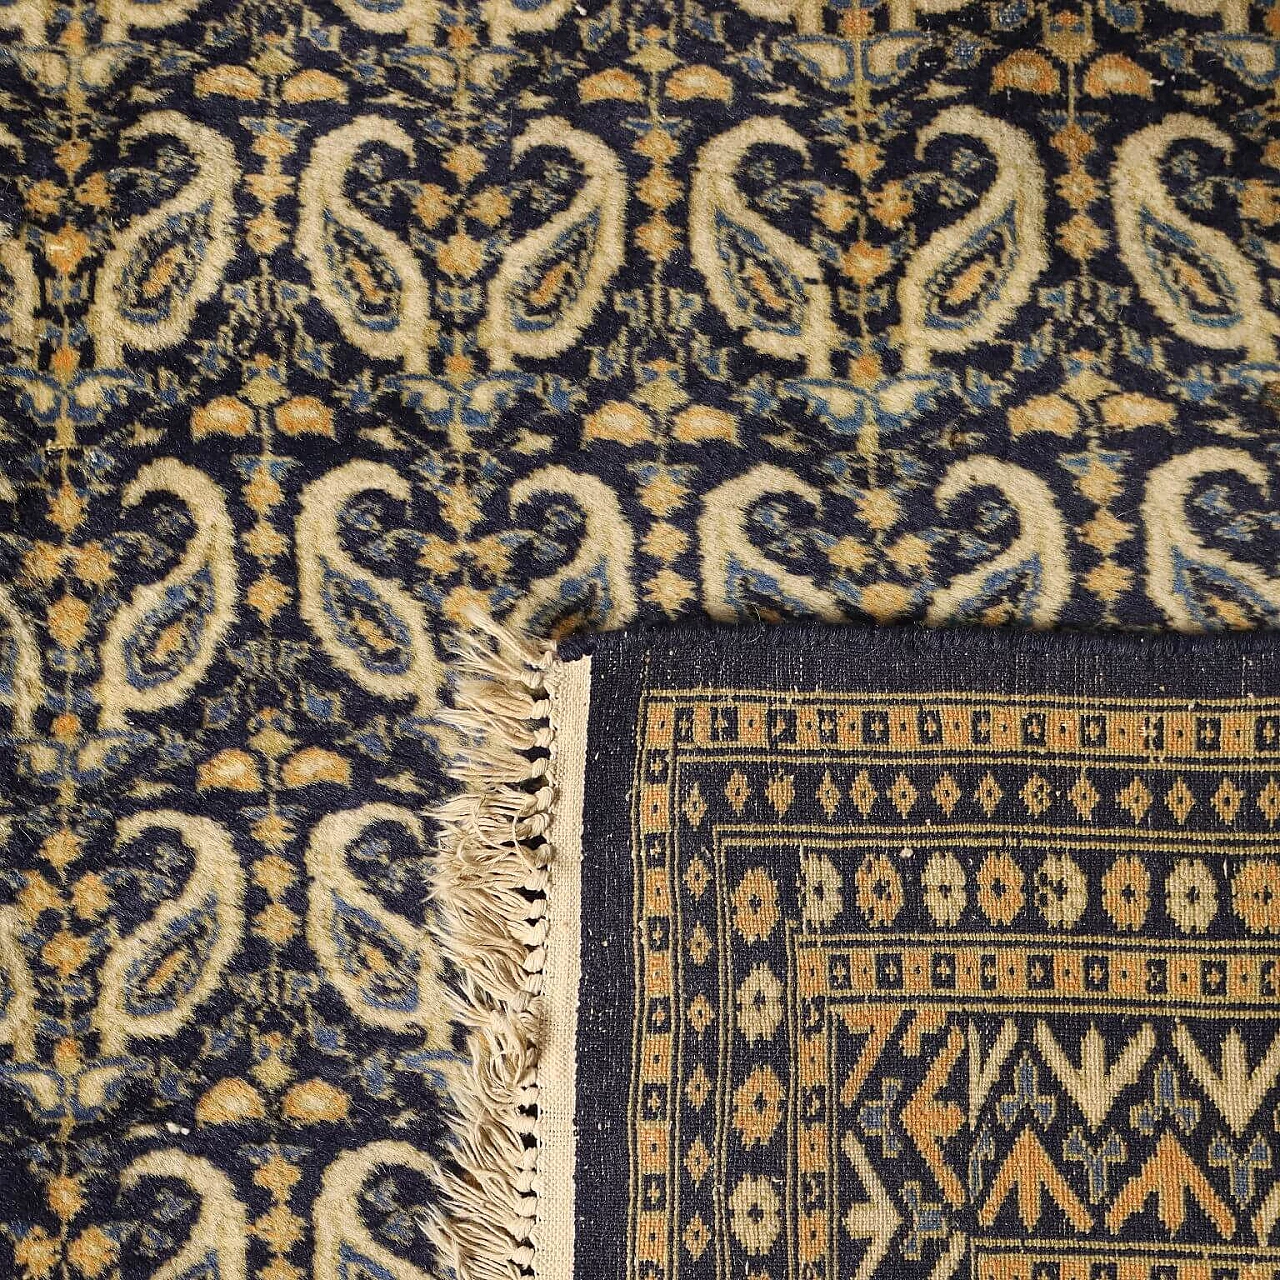 Iranian cotton and wool Ardebil rug 8